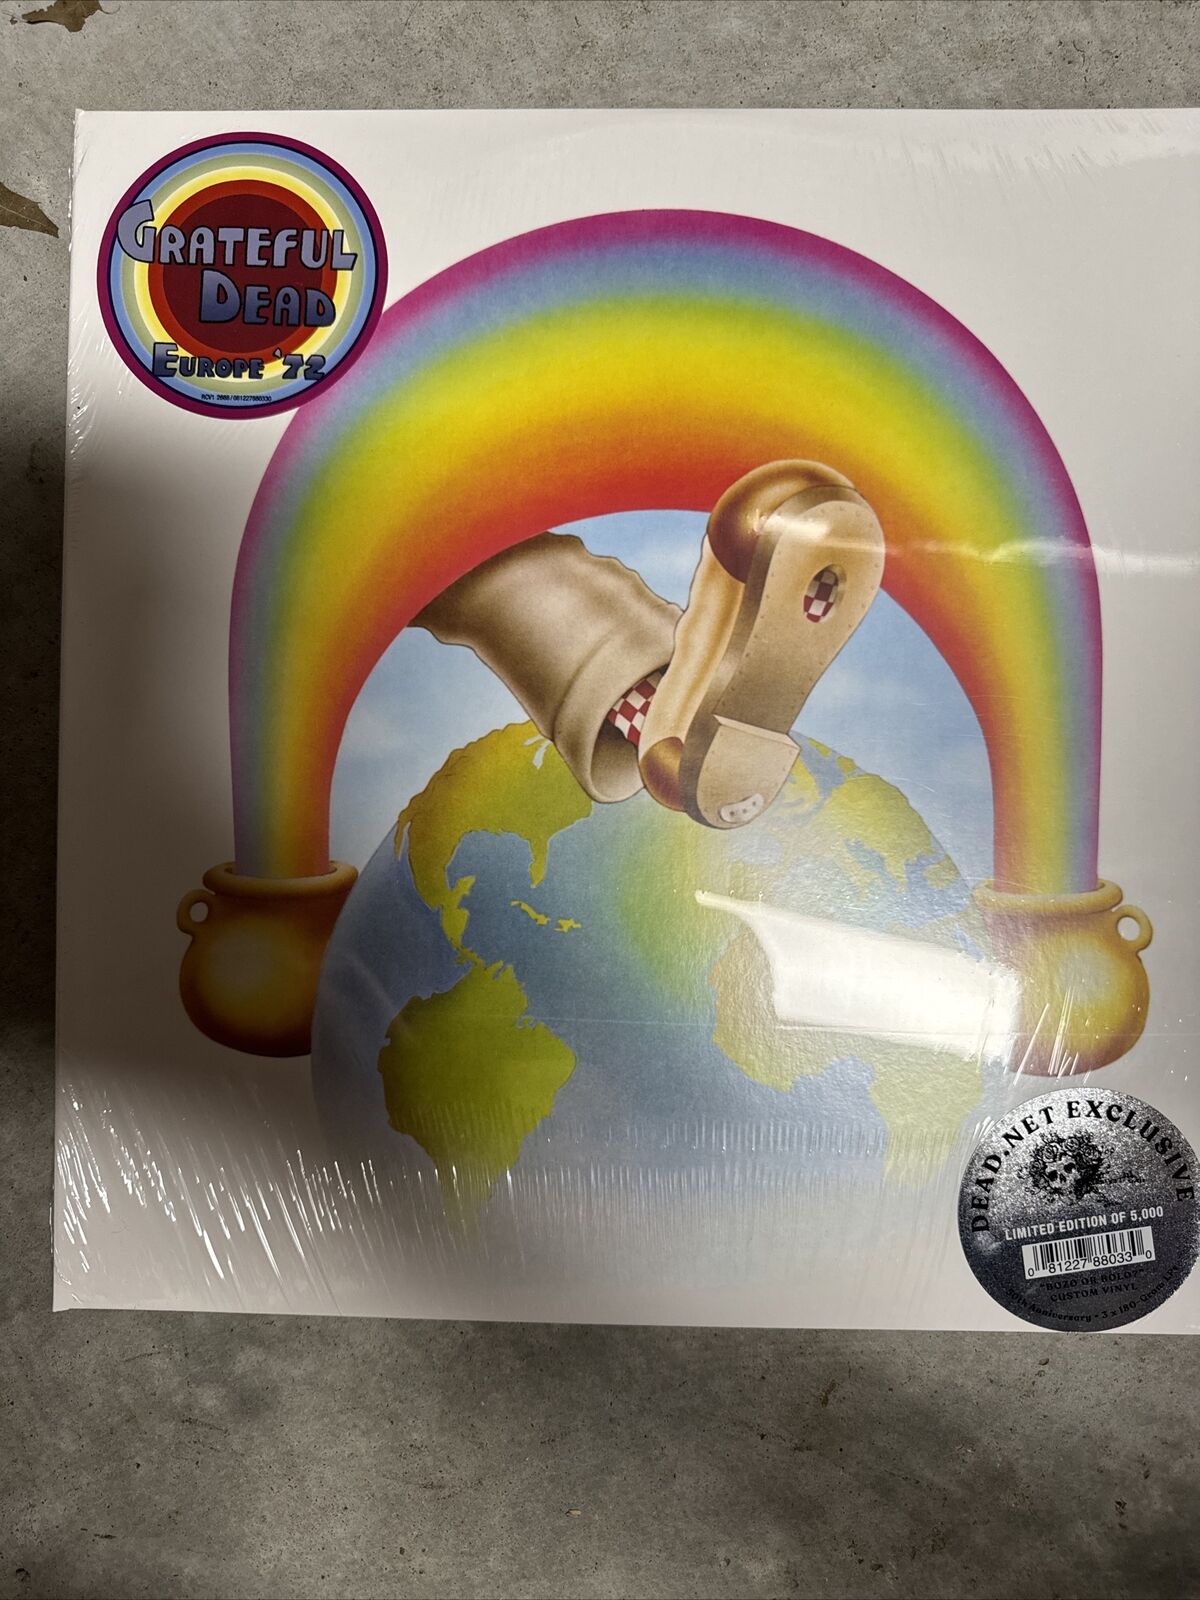 Europe by Grateful Dead (Record,2022) Limited Edition Of 5,000 “Bozo Or Bolo”?